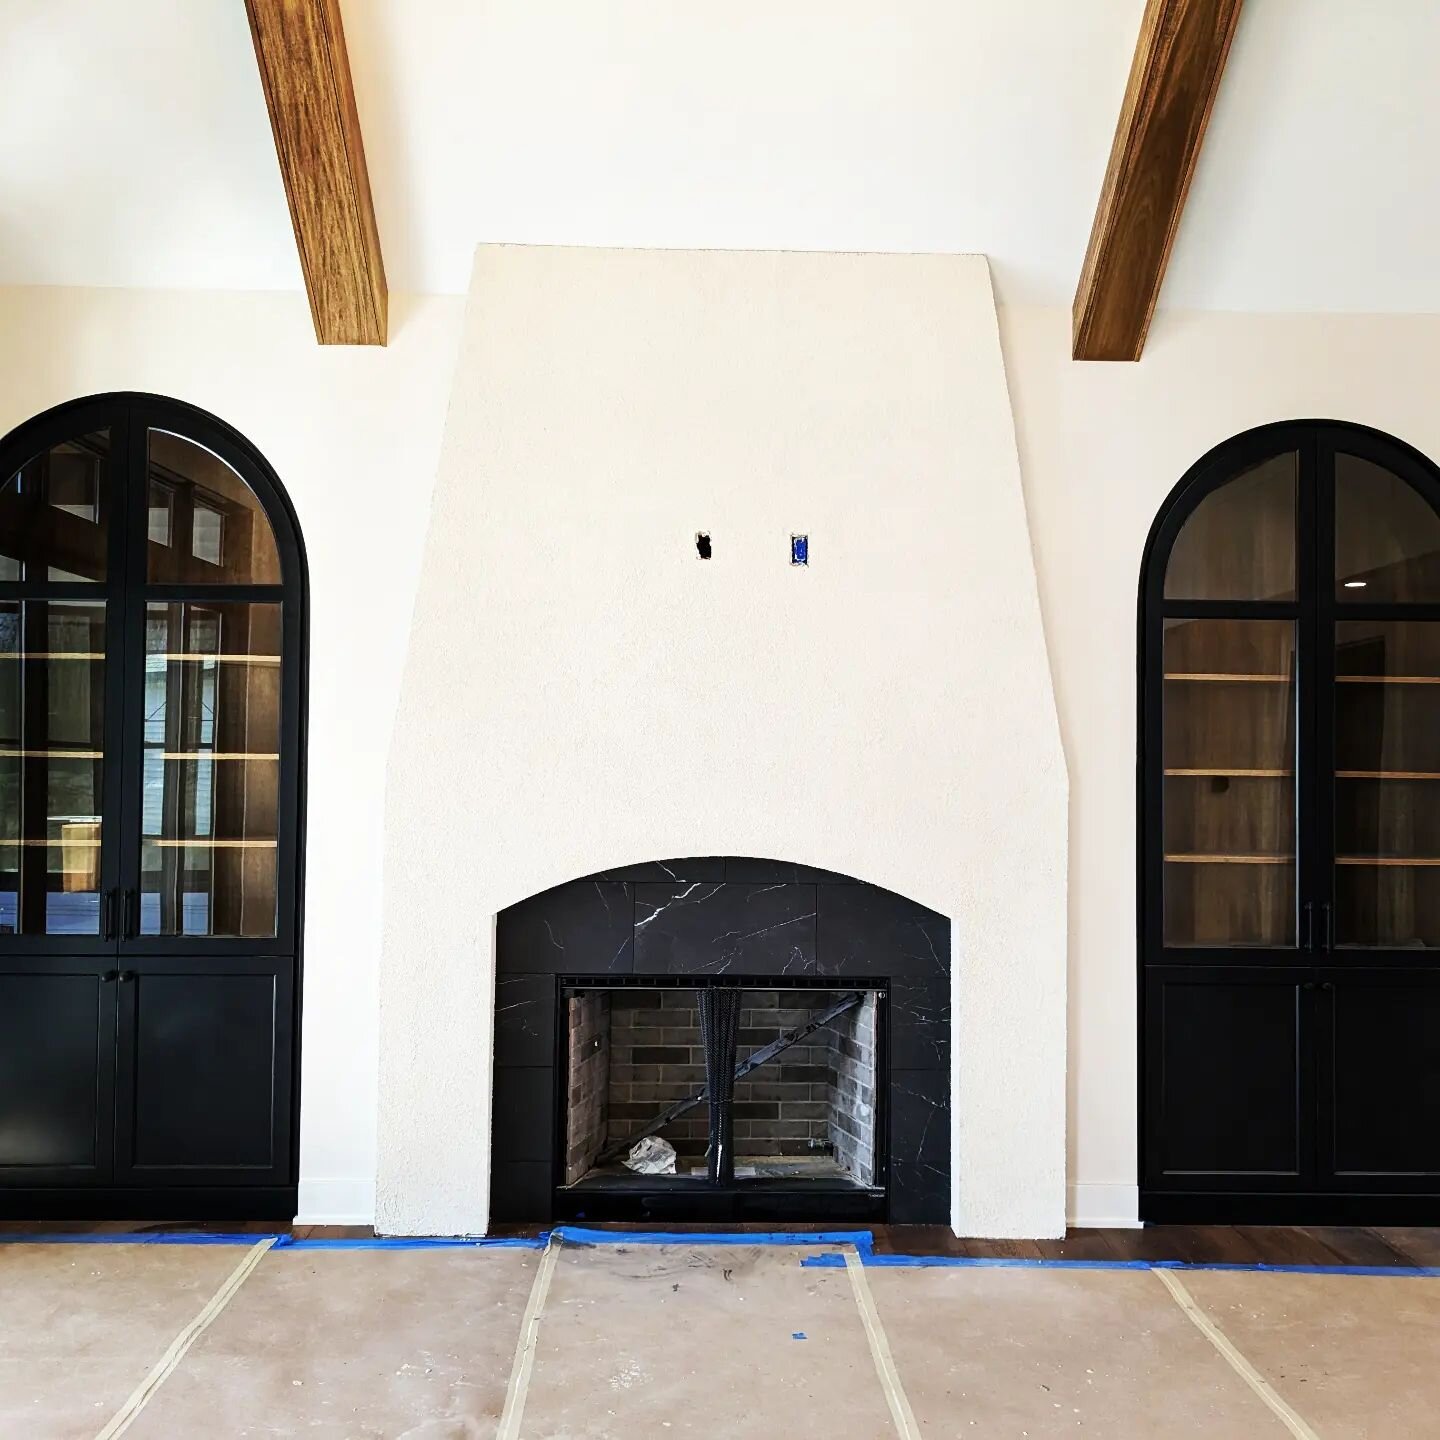 This is a stucco-esque system that we installed on this modern fireplace. It is something unique that is starting to take root in our area and it can be installed with a wide variety of colors